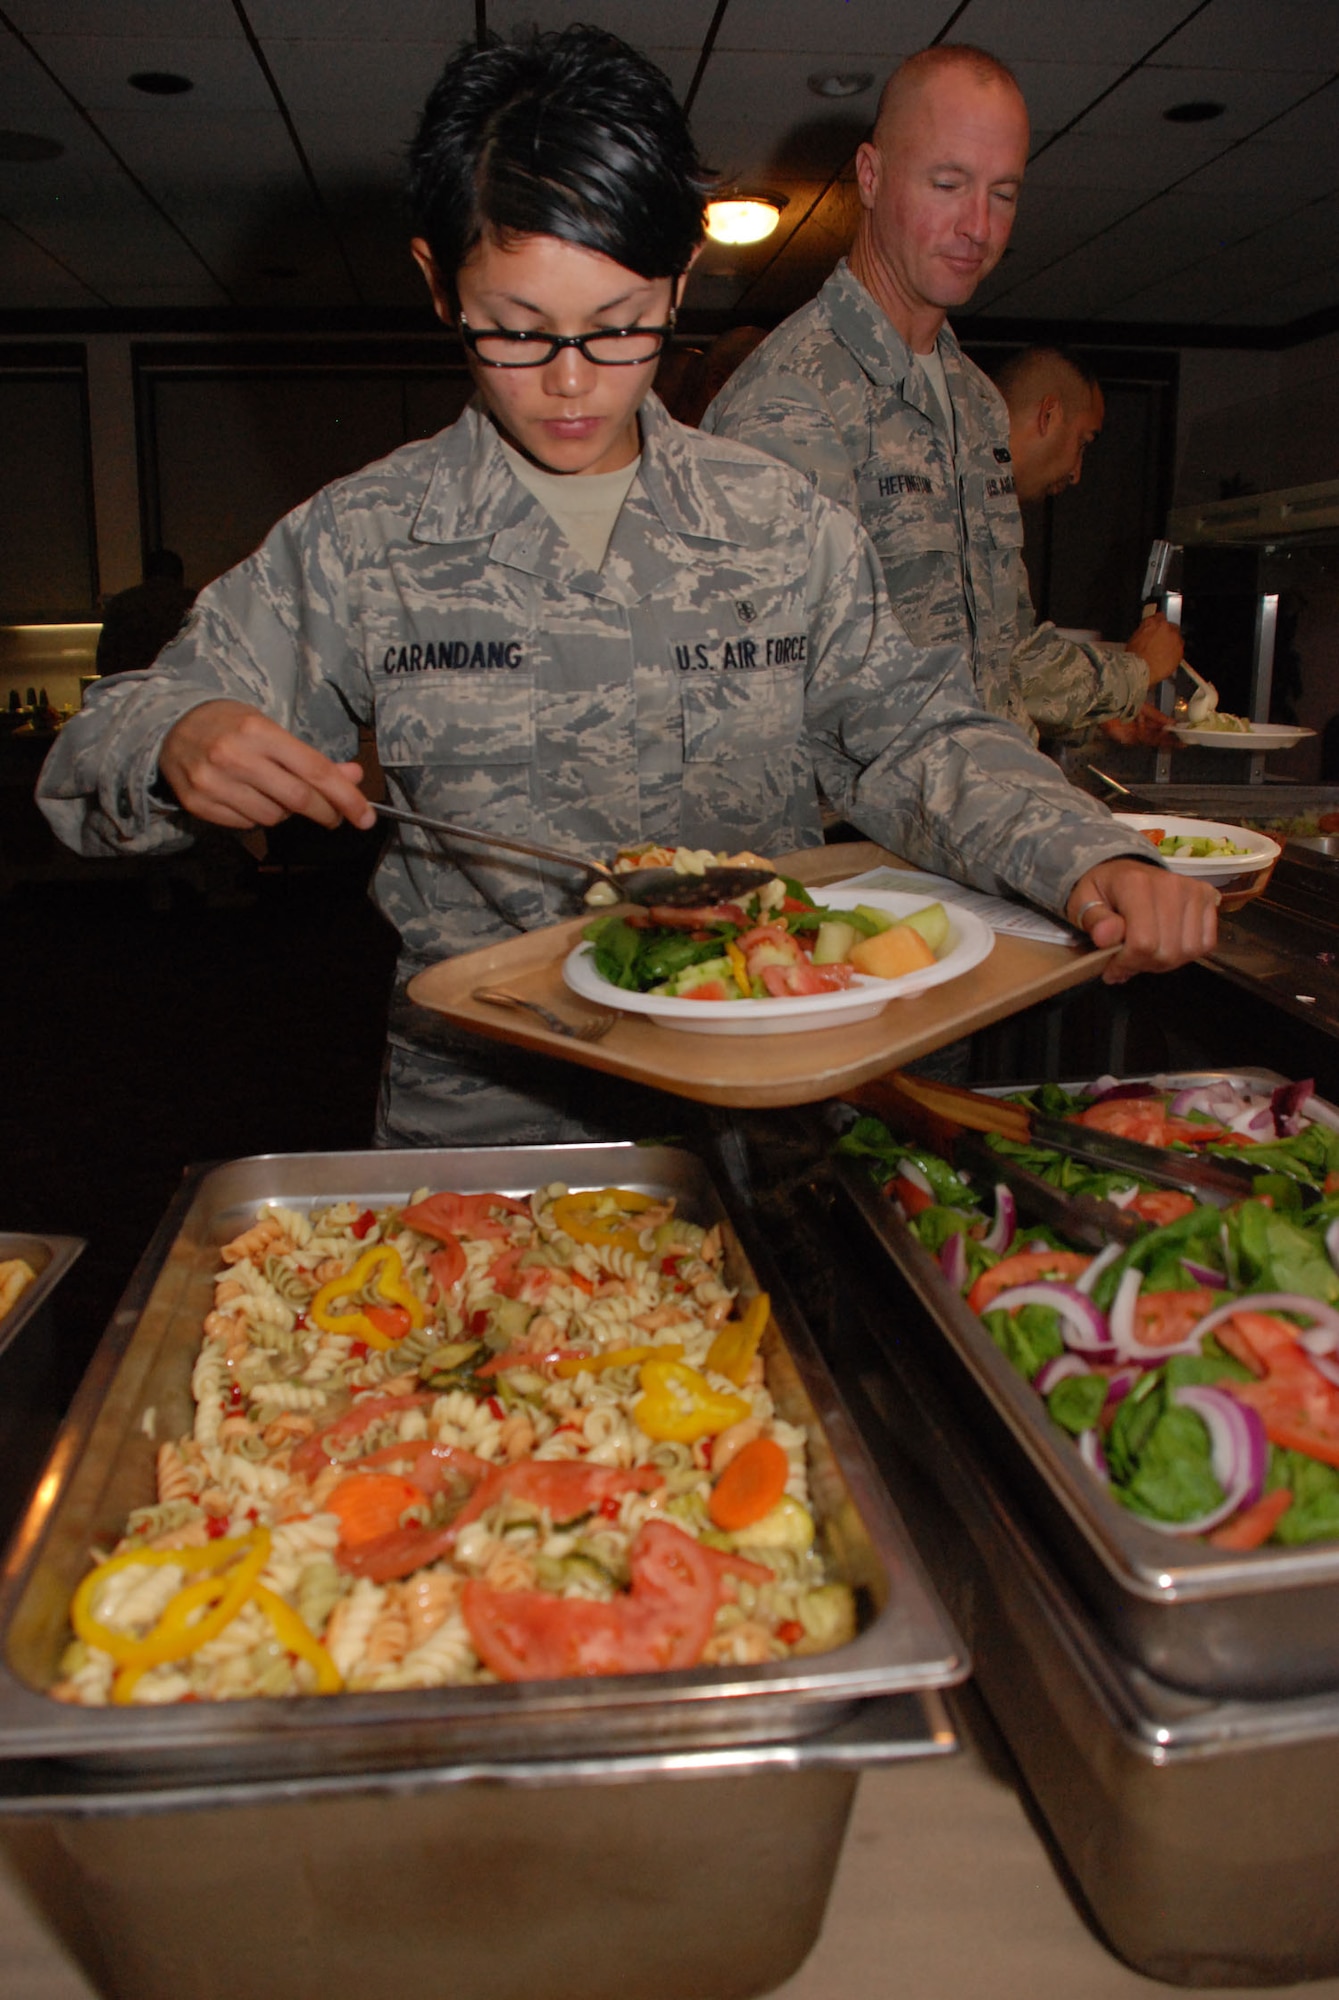 Senior Airman Lynnette Carandang, a medical technician with the 452nd Aeromedical Staging Squadron, scoops pasta salad onto her plate during lunch at the Hap Arnold Club at March Air Reserve Base, Calif., Sept. 11, 2011.  Carandang is a vegetarian and a squadron fitness leader and said she appreciates the new, healthy troop feeding menu at the club. (U.S. Air Force photo/Senior Airman Patrick Cabellon)